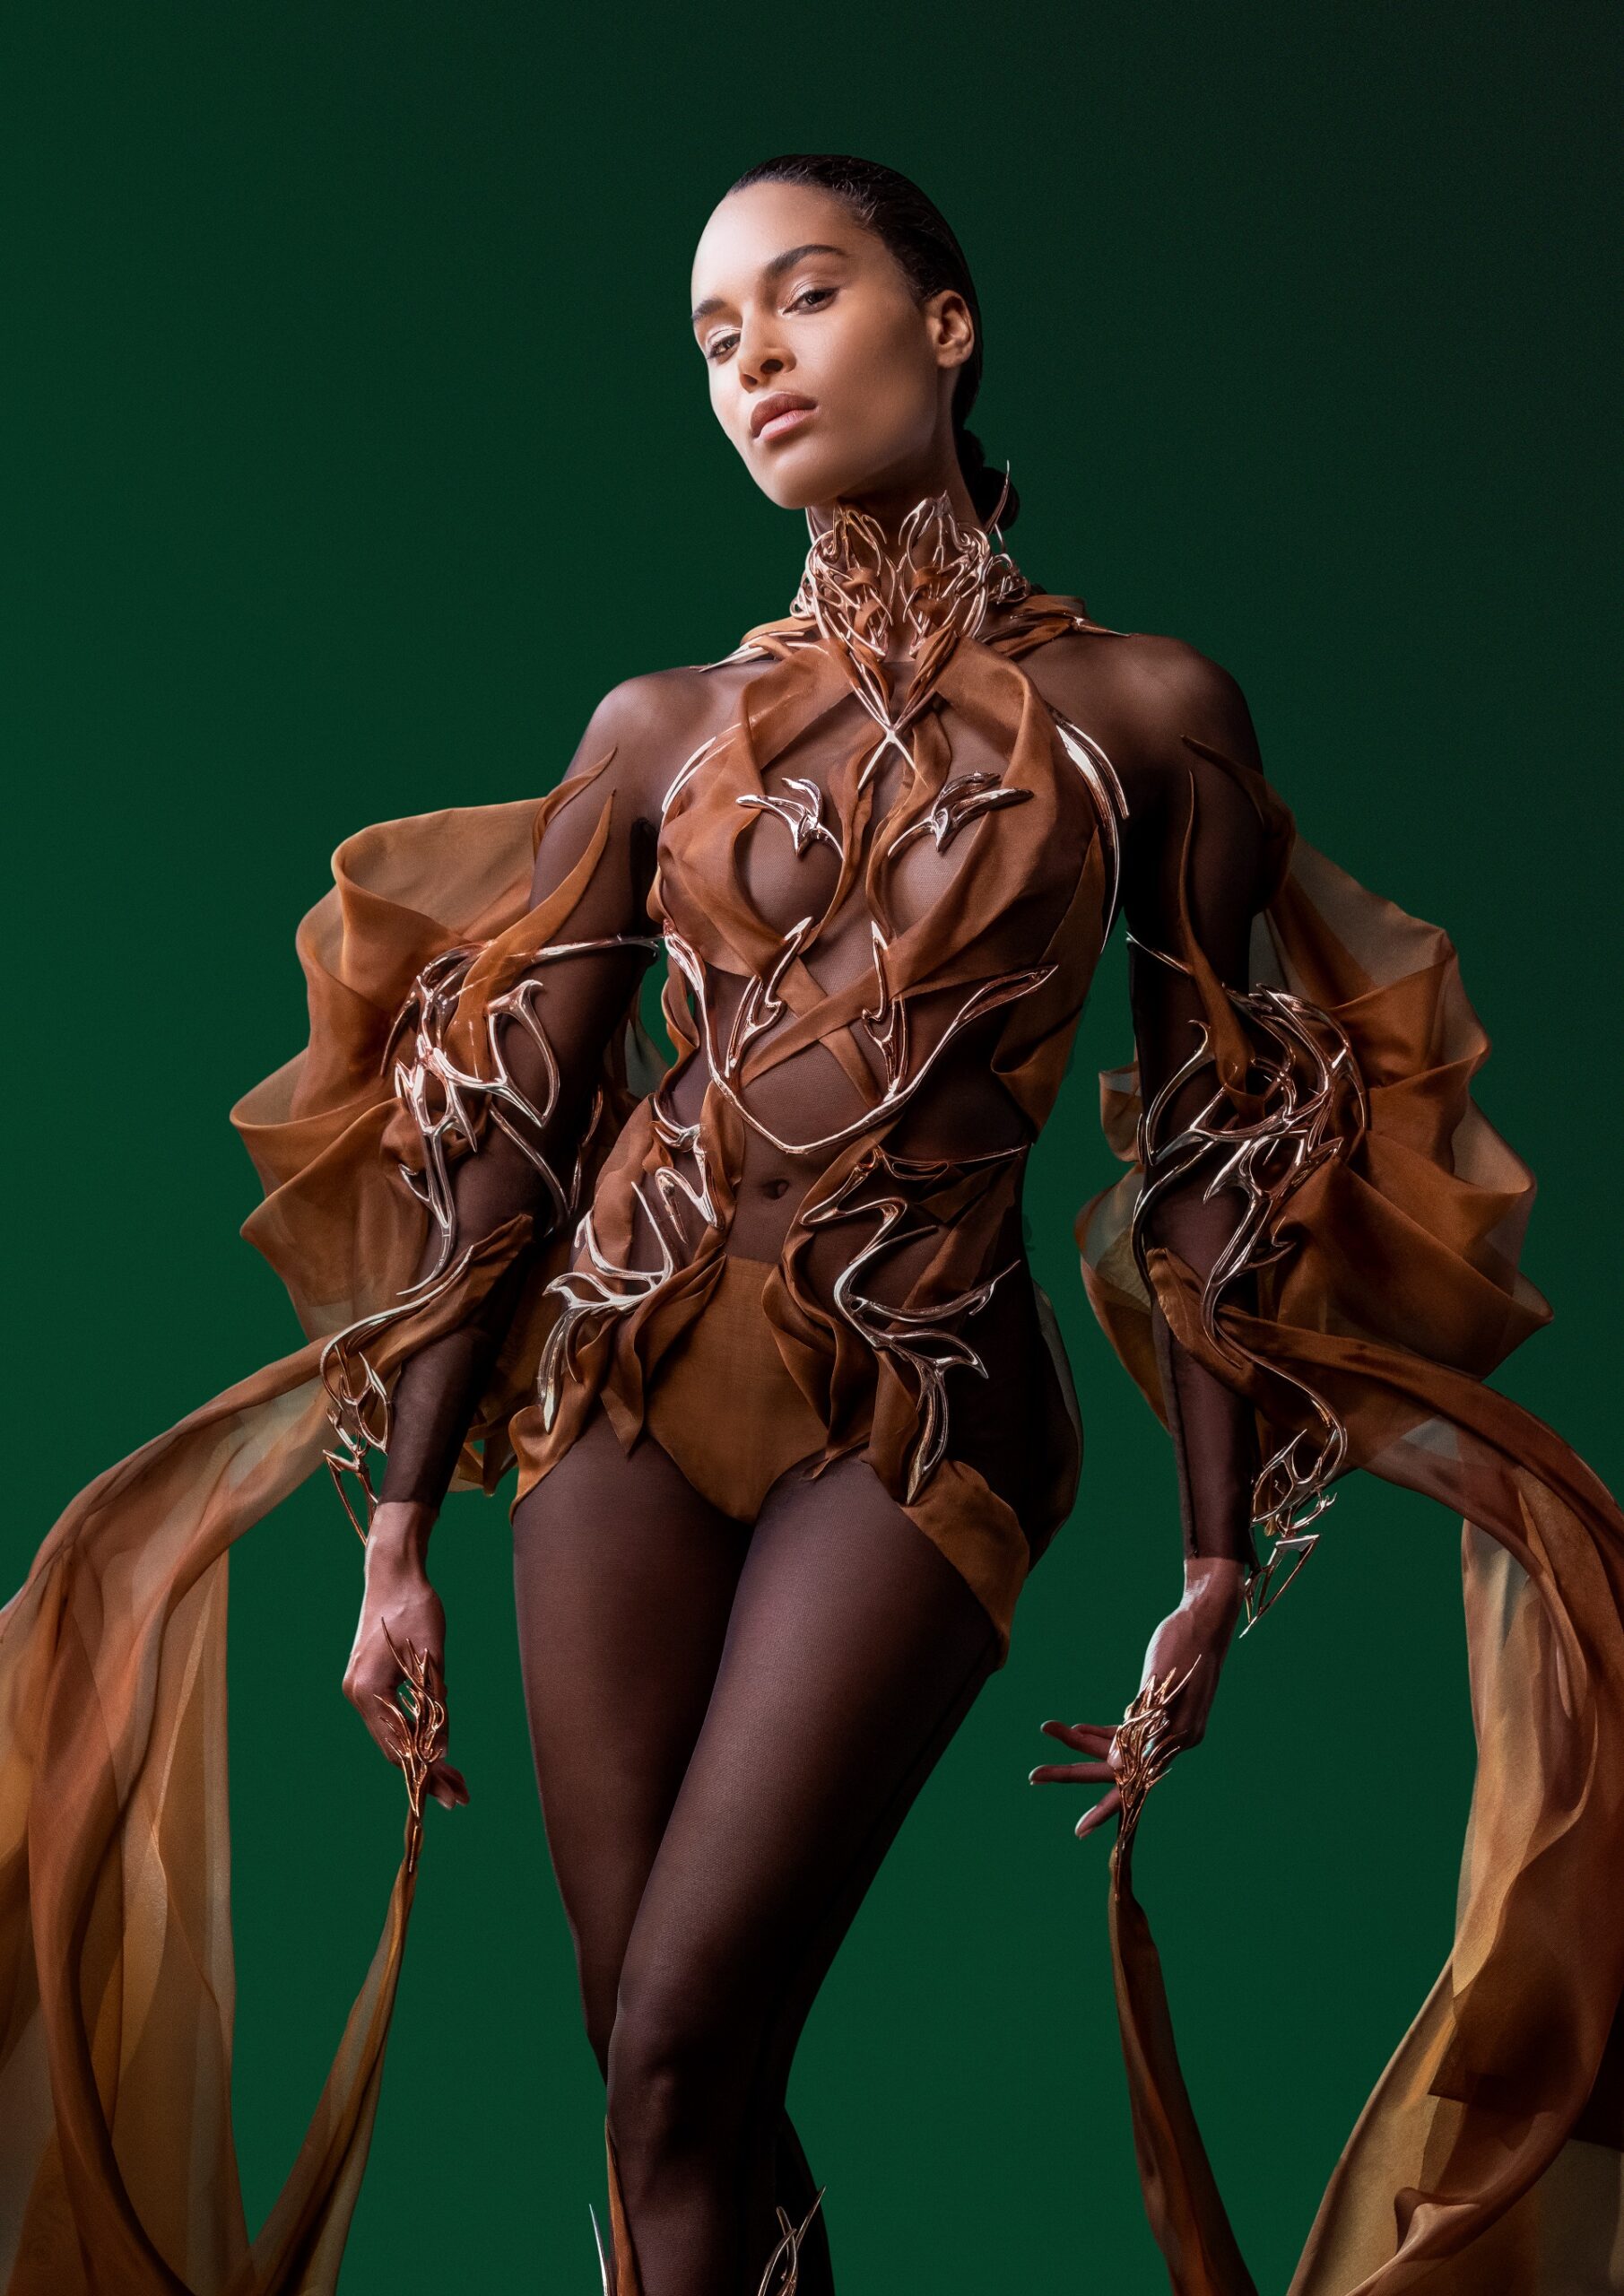 This haute couture dress is vegan: it is made from… cocoa beans.  A first.